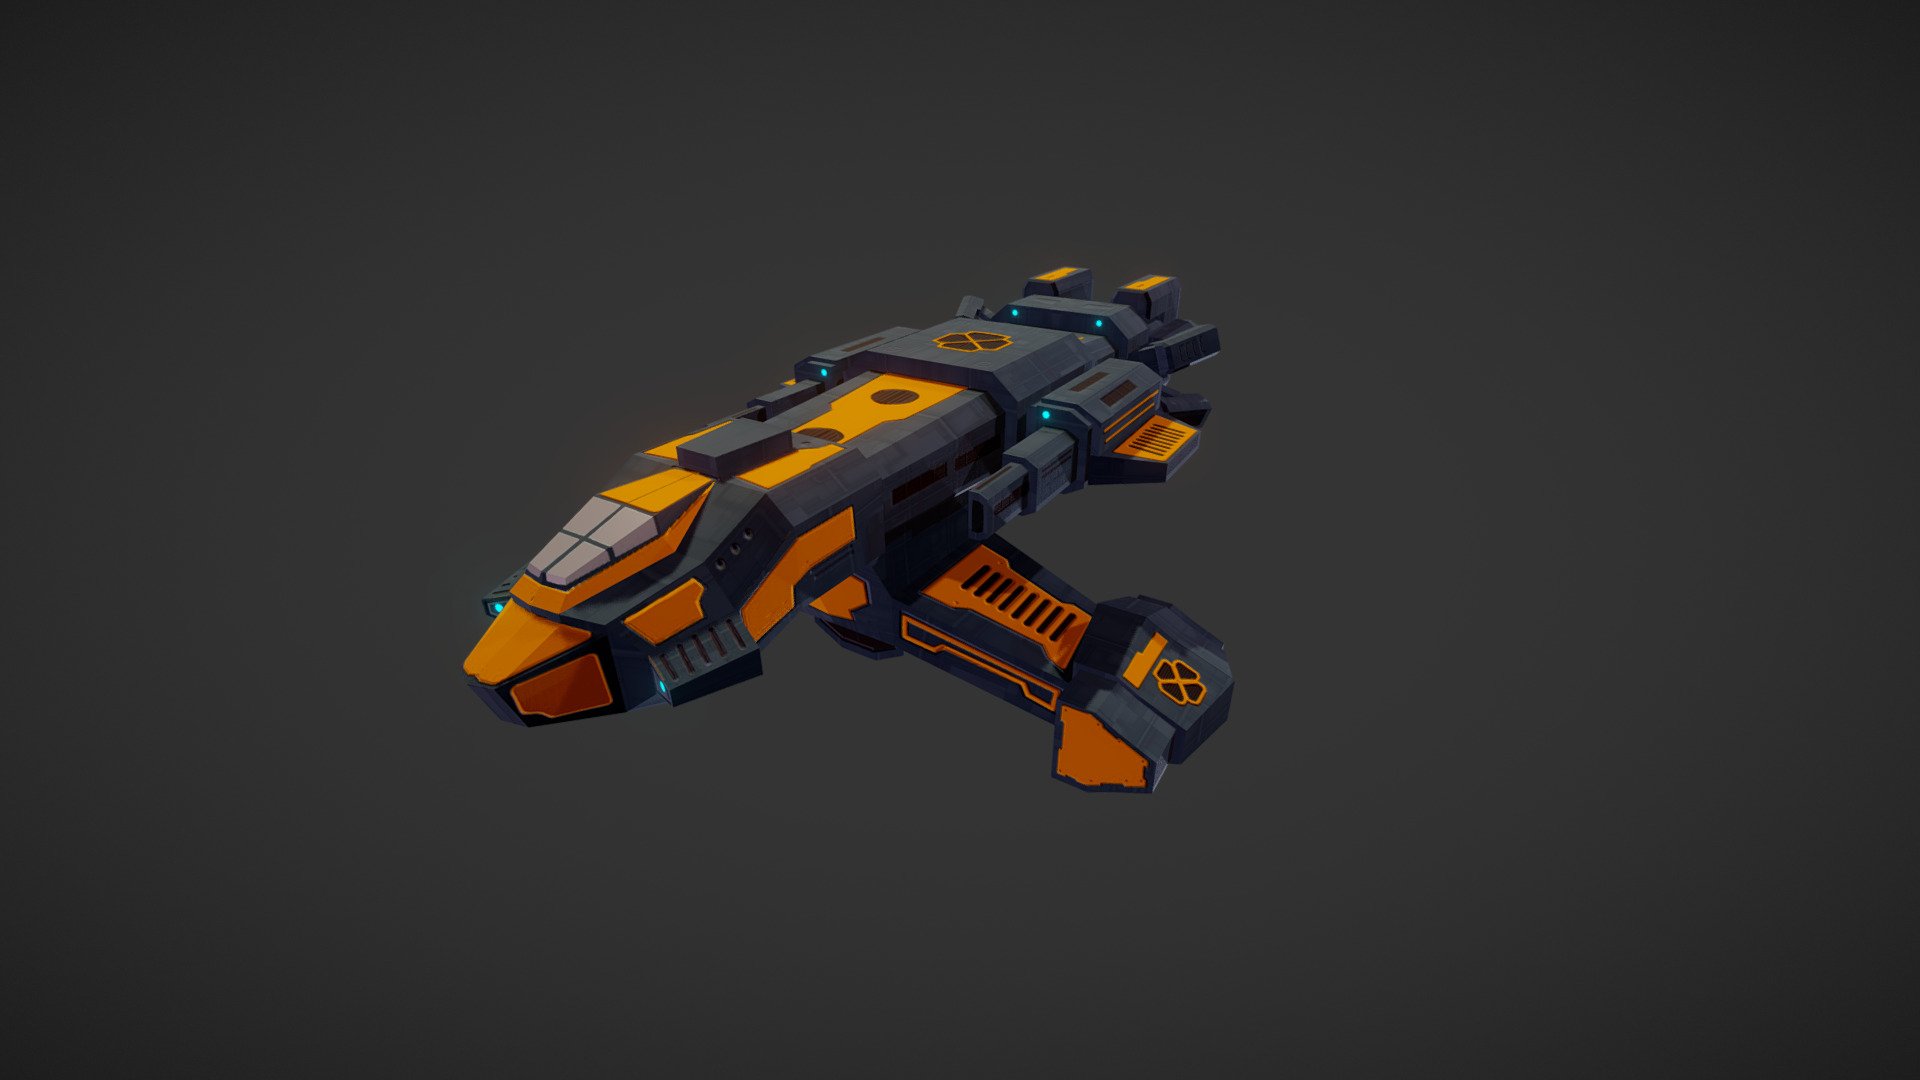 made using blender, Substance Painter.  Inspired by the Homeworld games and concept art 3d model